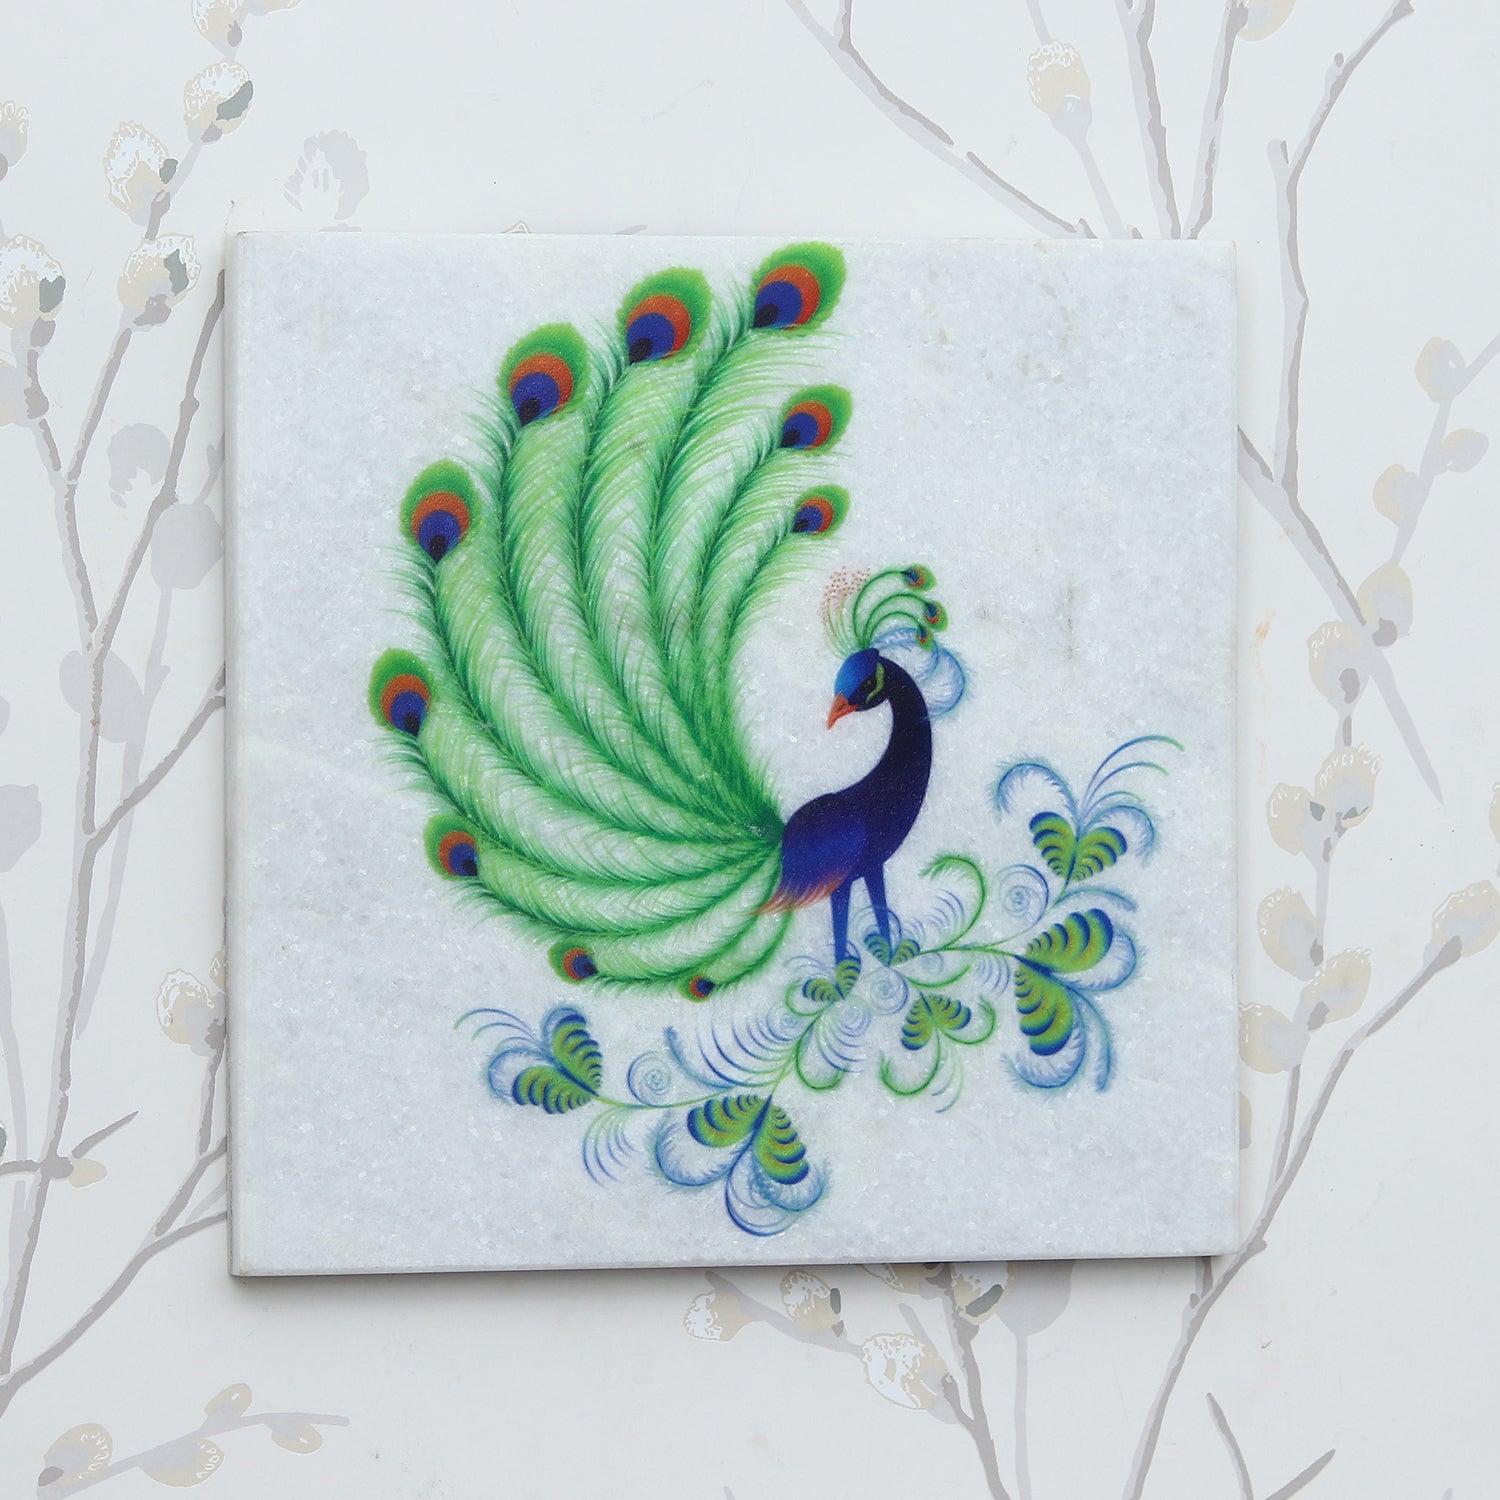 Dancing Peacock Acrylic Print by Ajay Parippally - Pixels